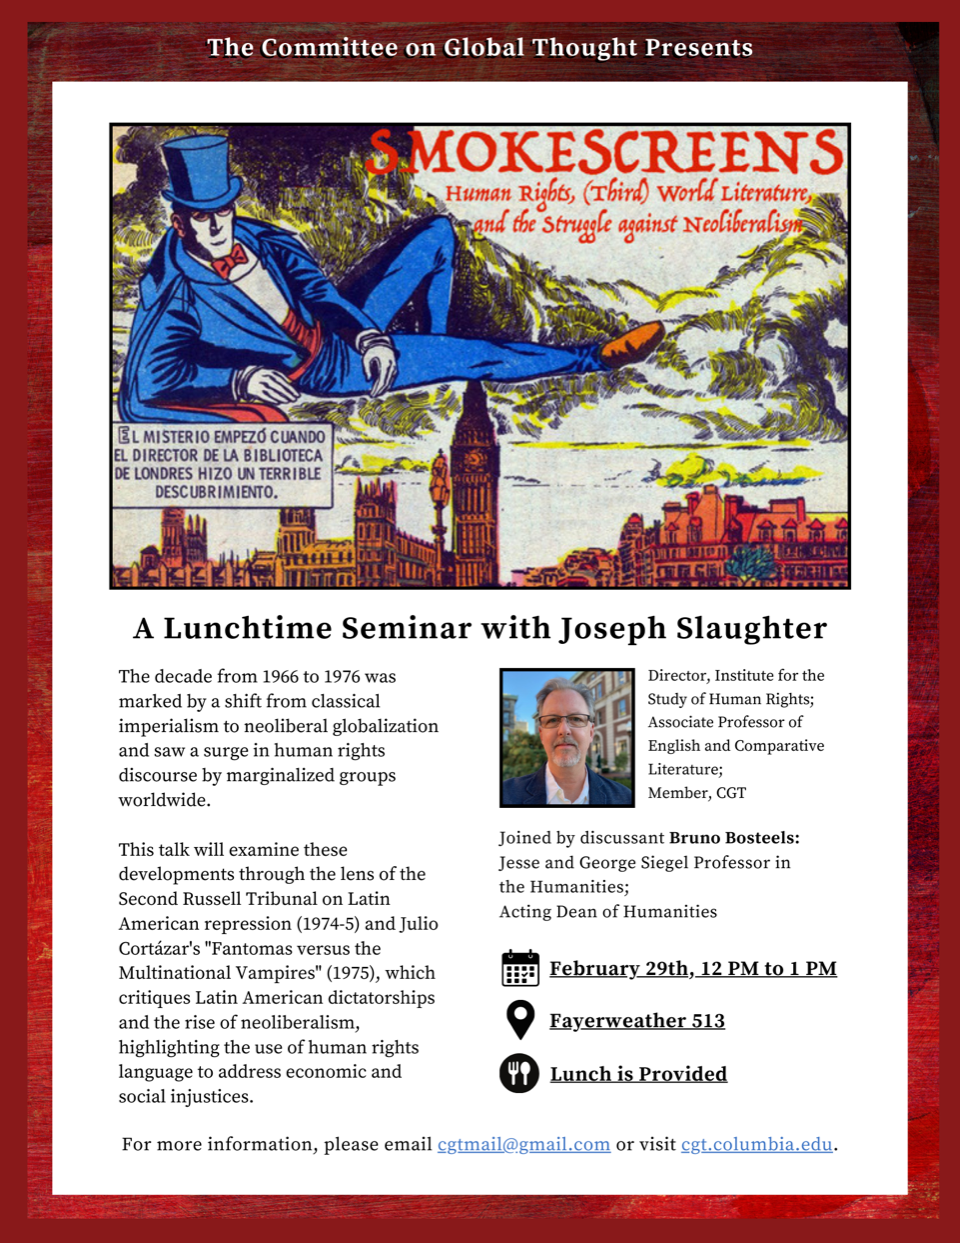 SMOKESCREENS: Human Rights, (Third) World Literature, and the Struggle Against Neoliberalism—A Lunchtime Seminar with Joseph Slaughter